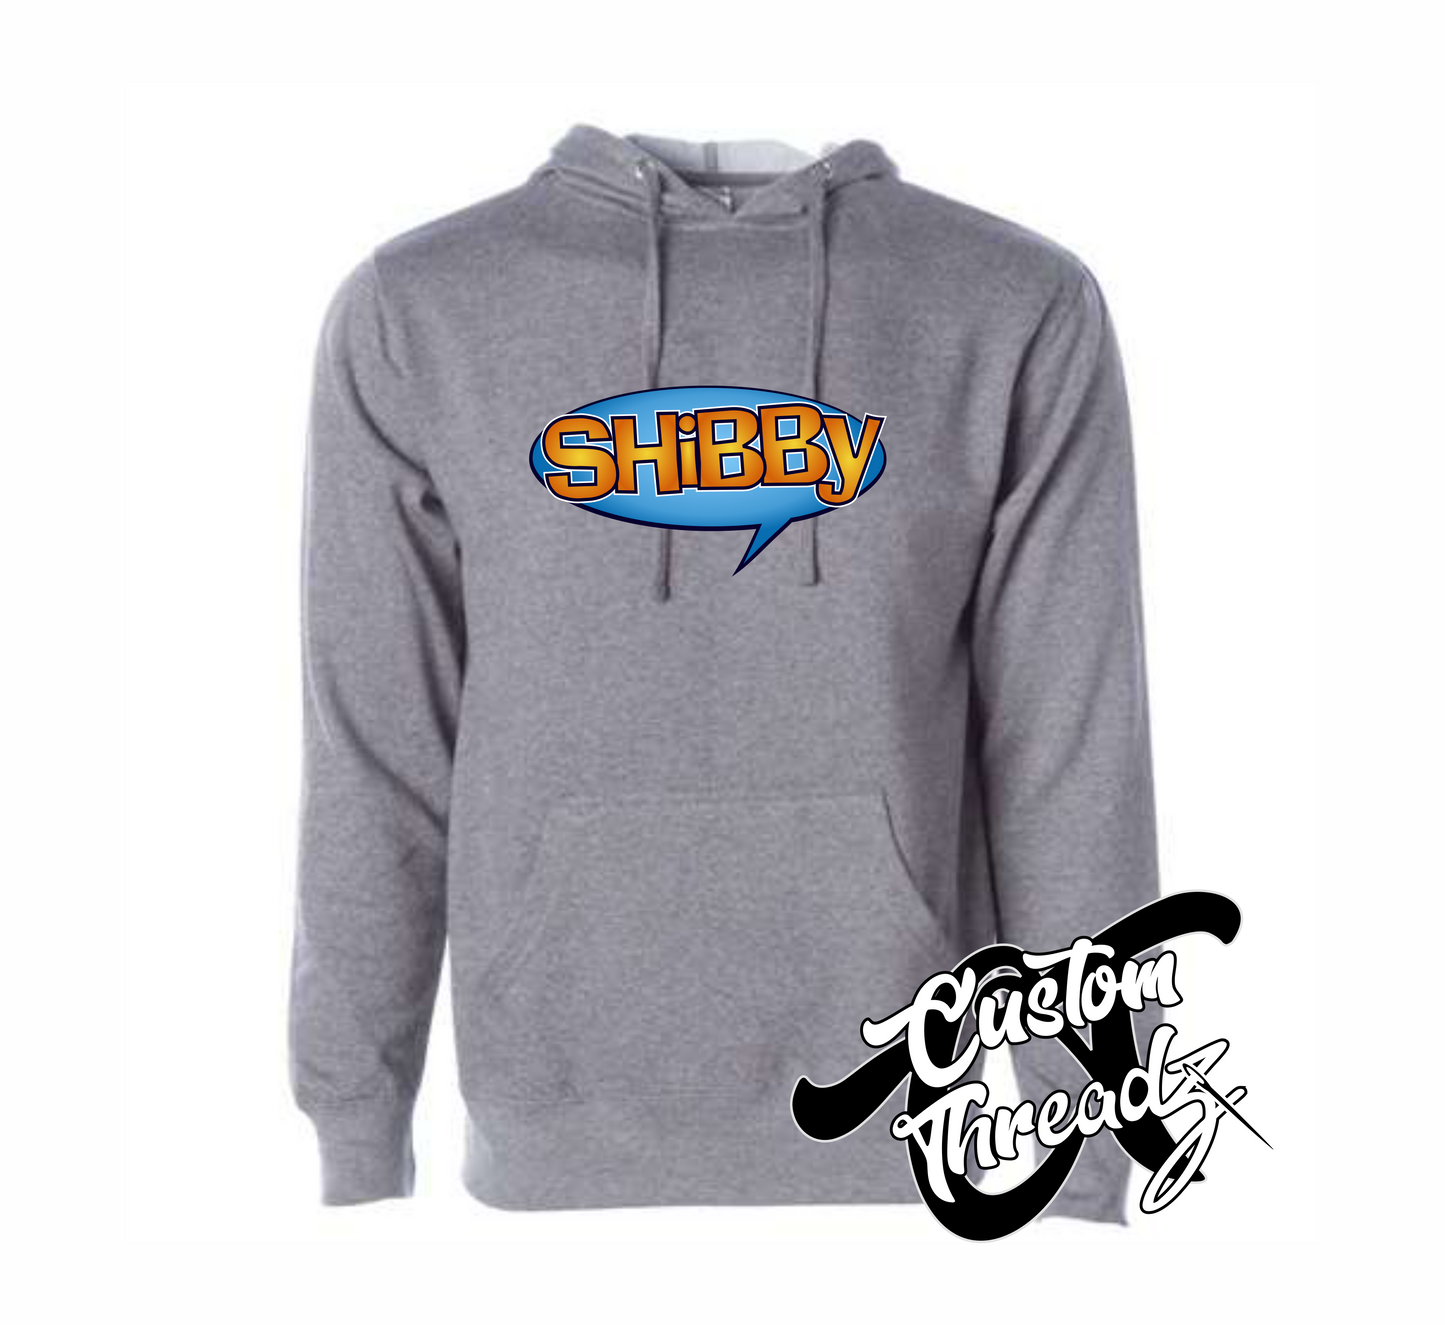 gunmetal grey hoodie with shibby dude wheres my car DTG printed design